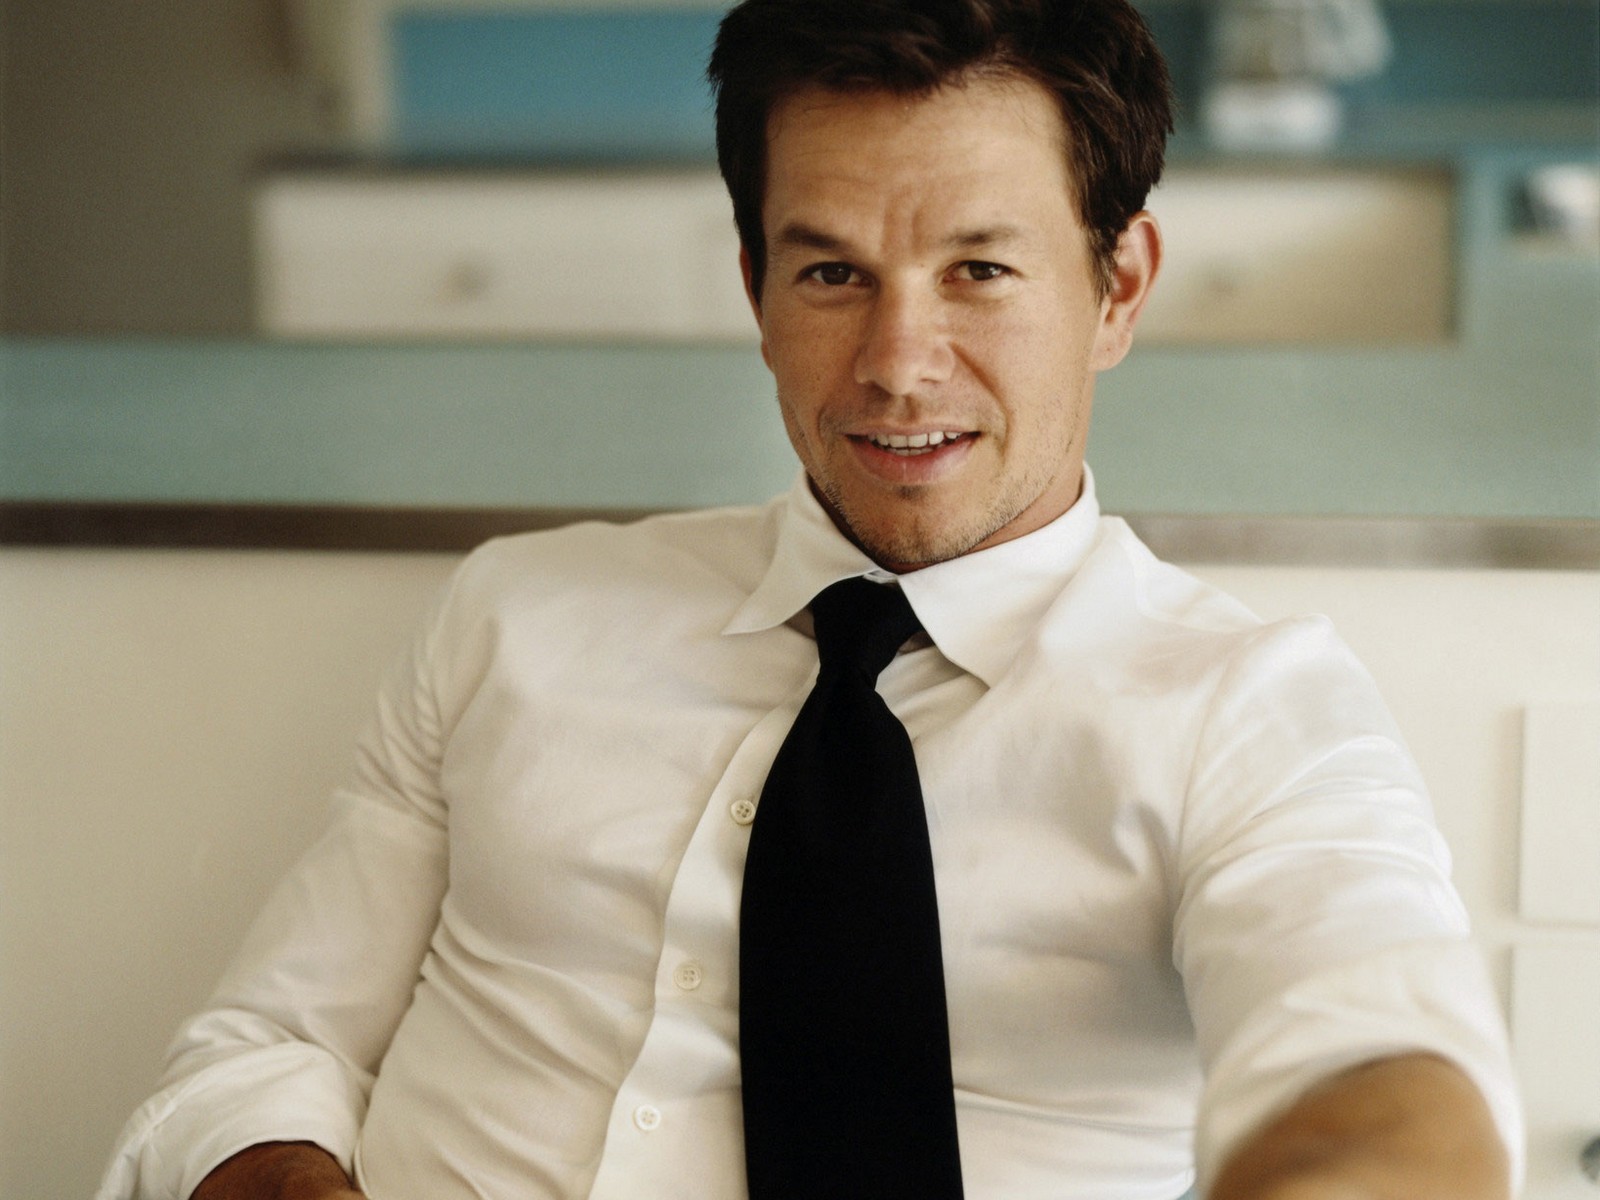 Overview of the many roles and movies of actor Mark Wahlberg